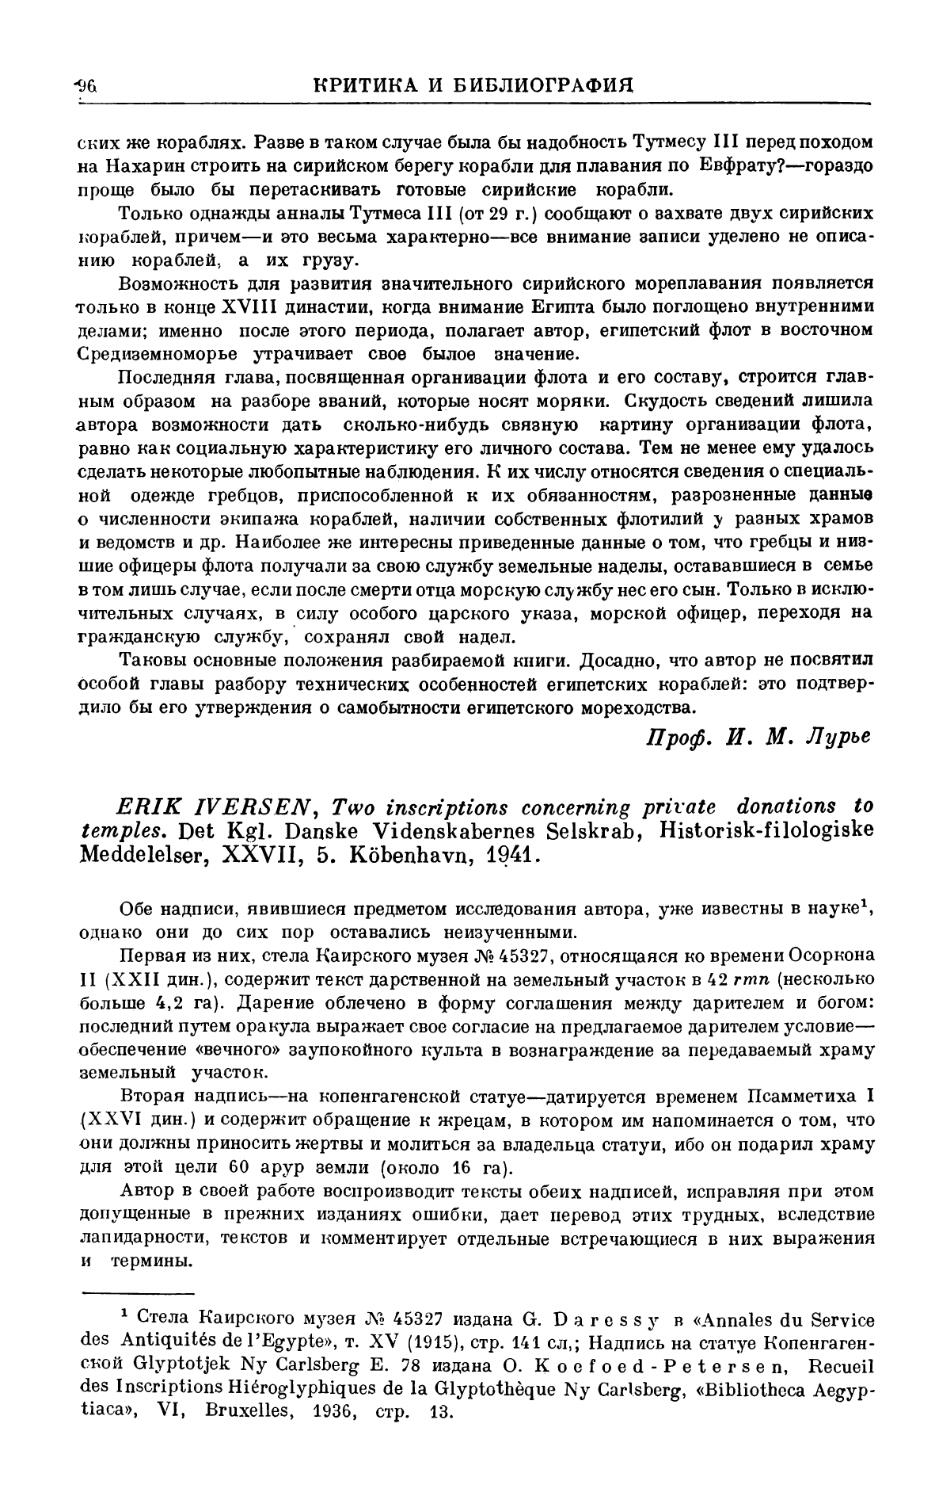 Он же — E. Iversen, Two inscriptions concerning private donations to temples